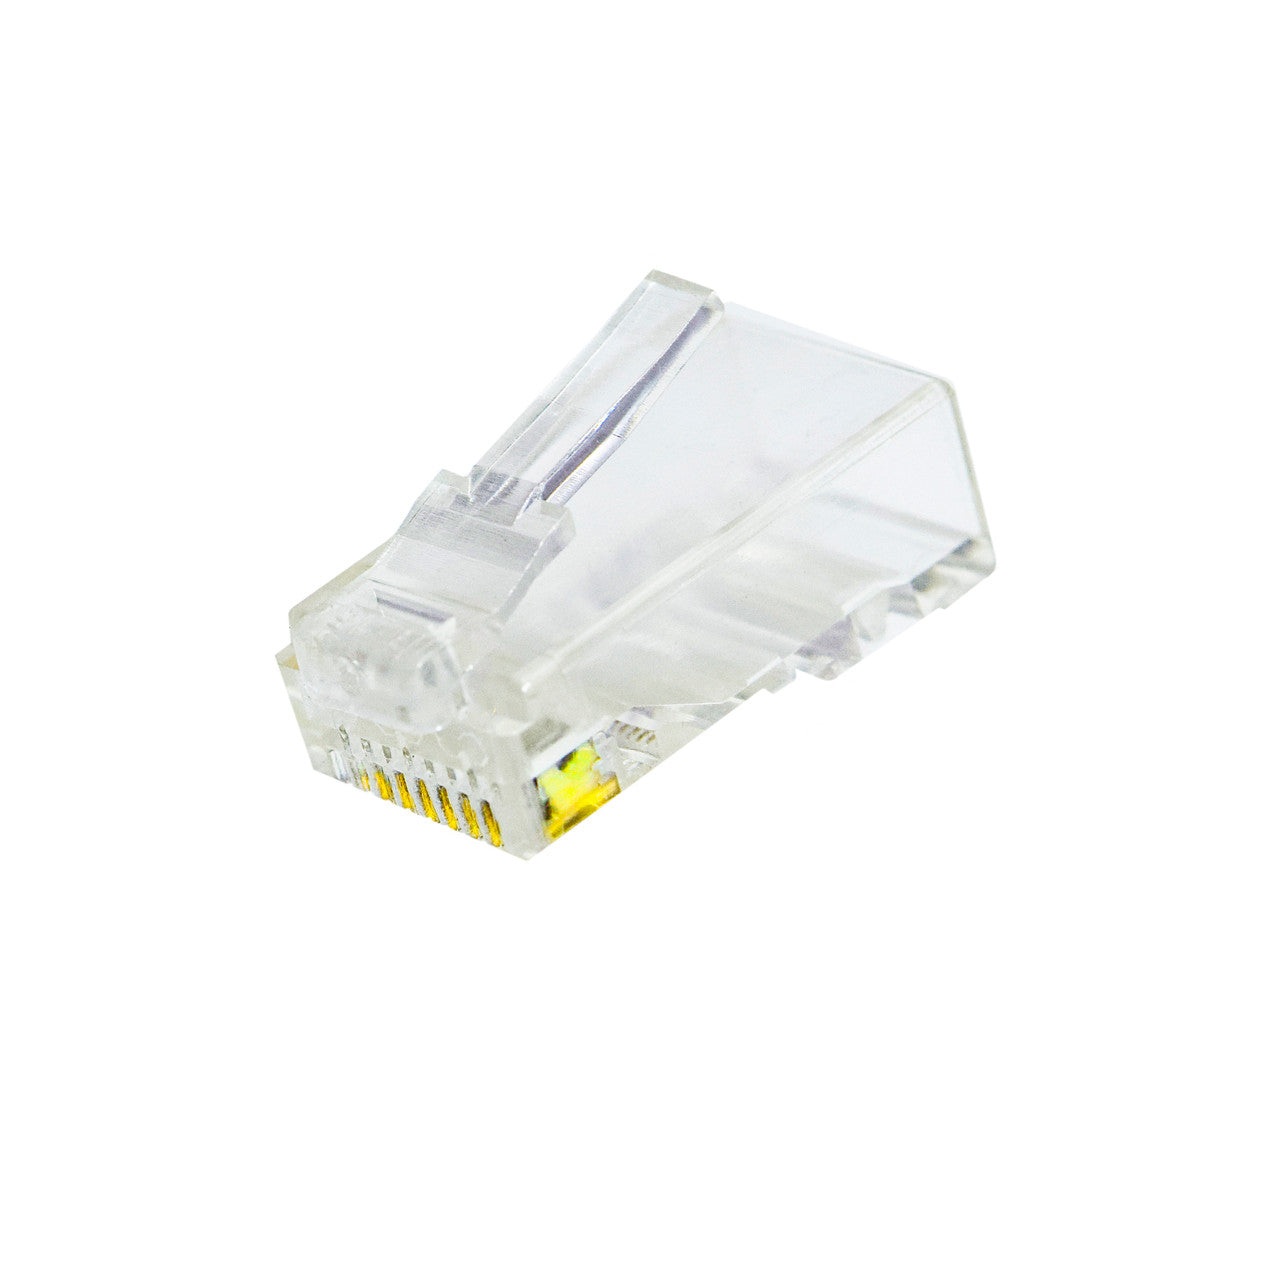 Category 6 RJ45 Modular Plug with Loading Bar for Solid Cable